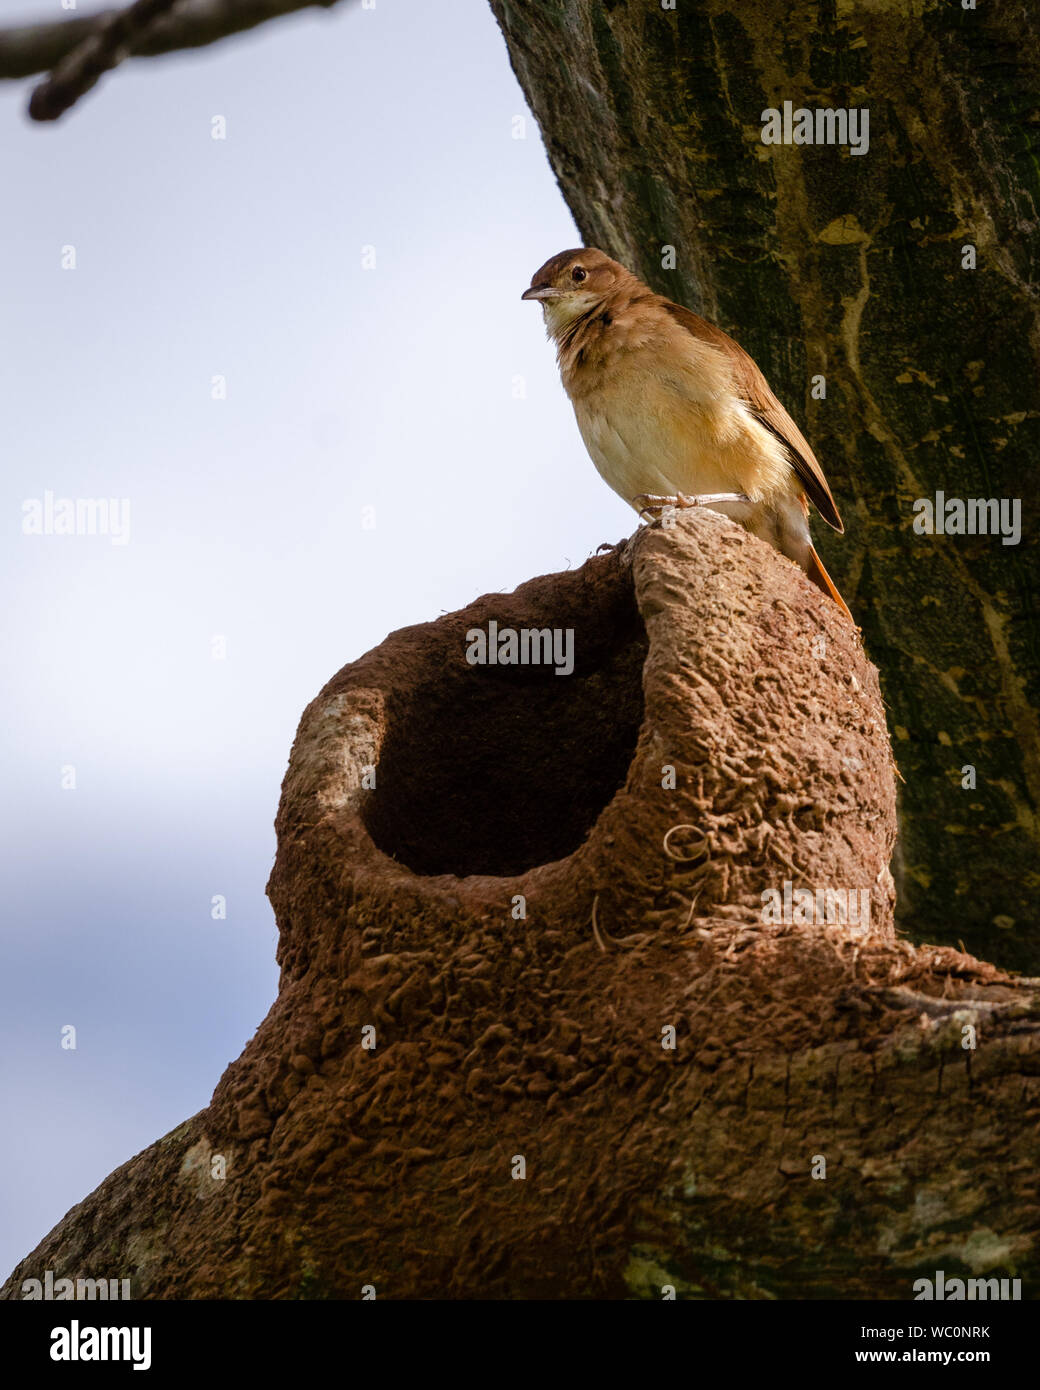 A bird standing on top of a nest looking down Stock Photo